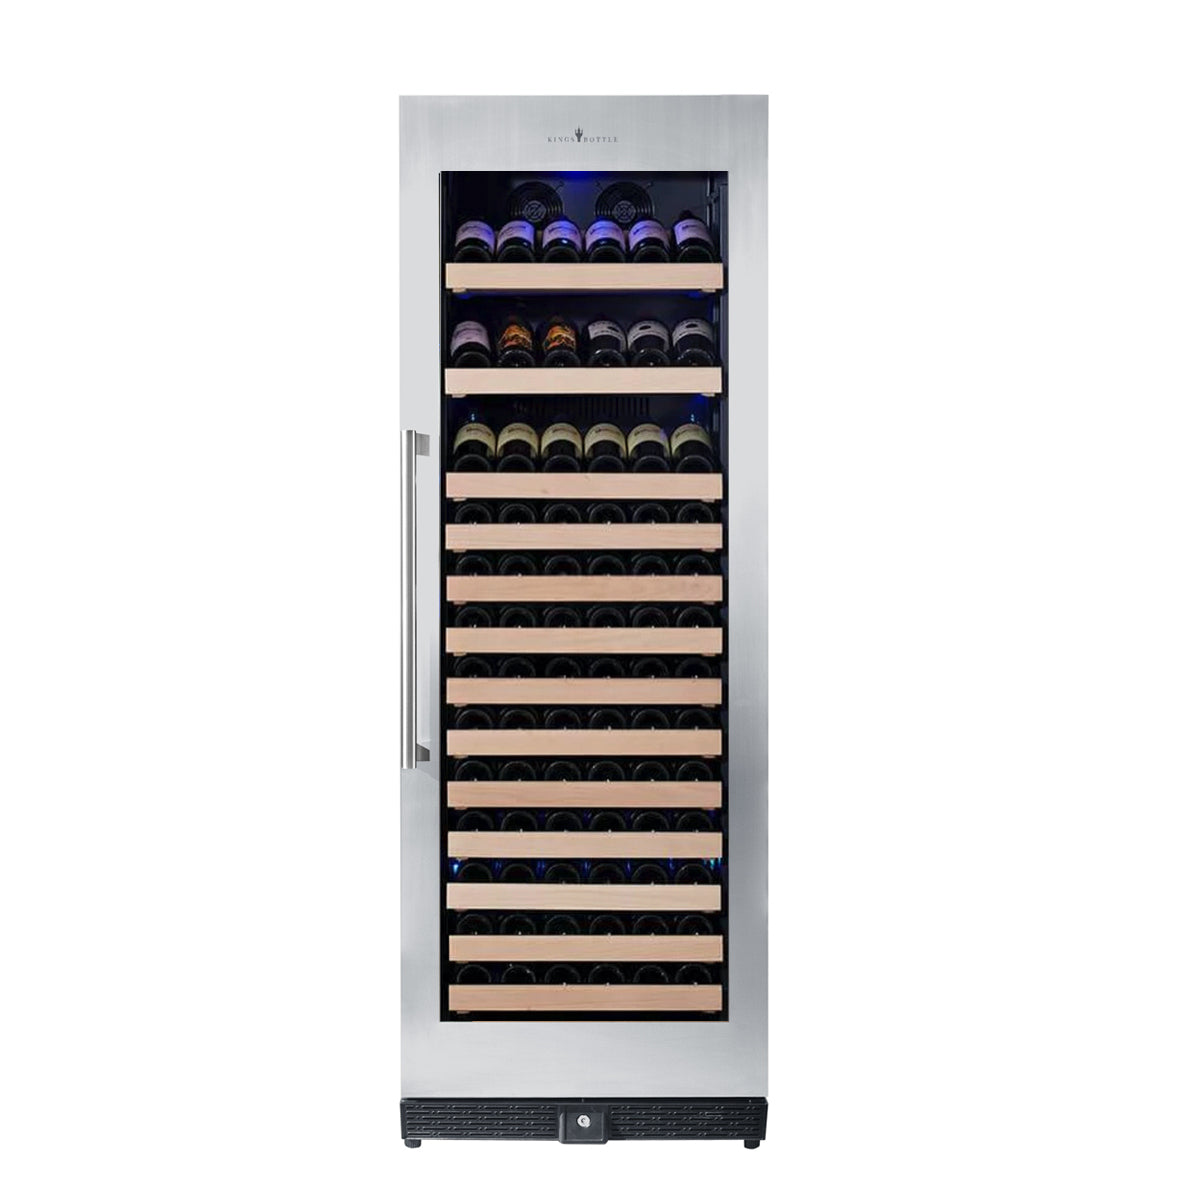 KingsBottle Tall Large Wine Cooler Refrigerator Drinks Cabinet with Stainless Steel Trim